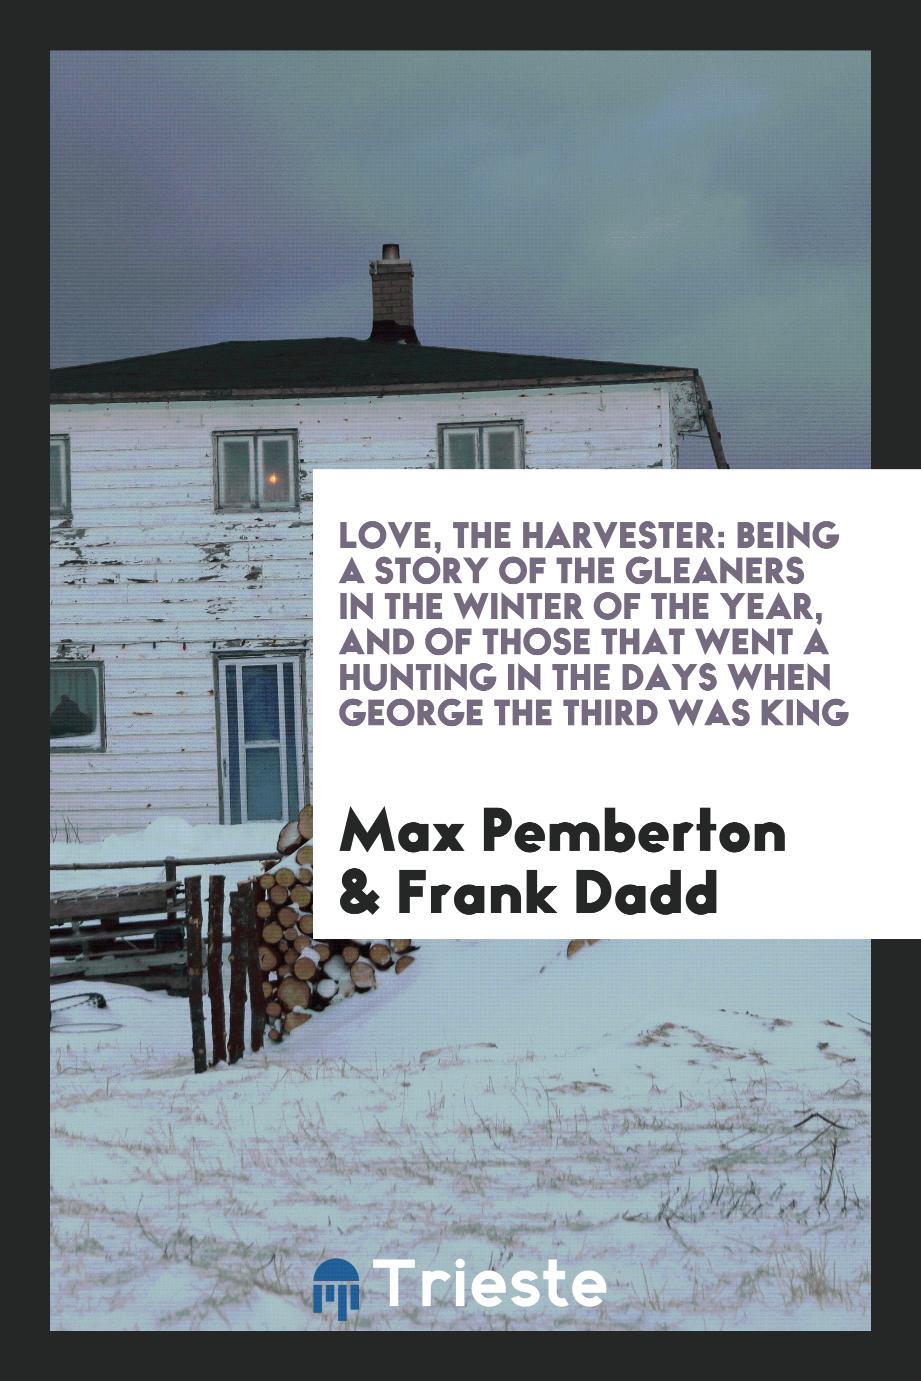 Love, the Harvester: Being a Story of the Gleaners in the Winter of the Year, and of Those That Went a Hunting in the Days When George the Third Was King